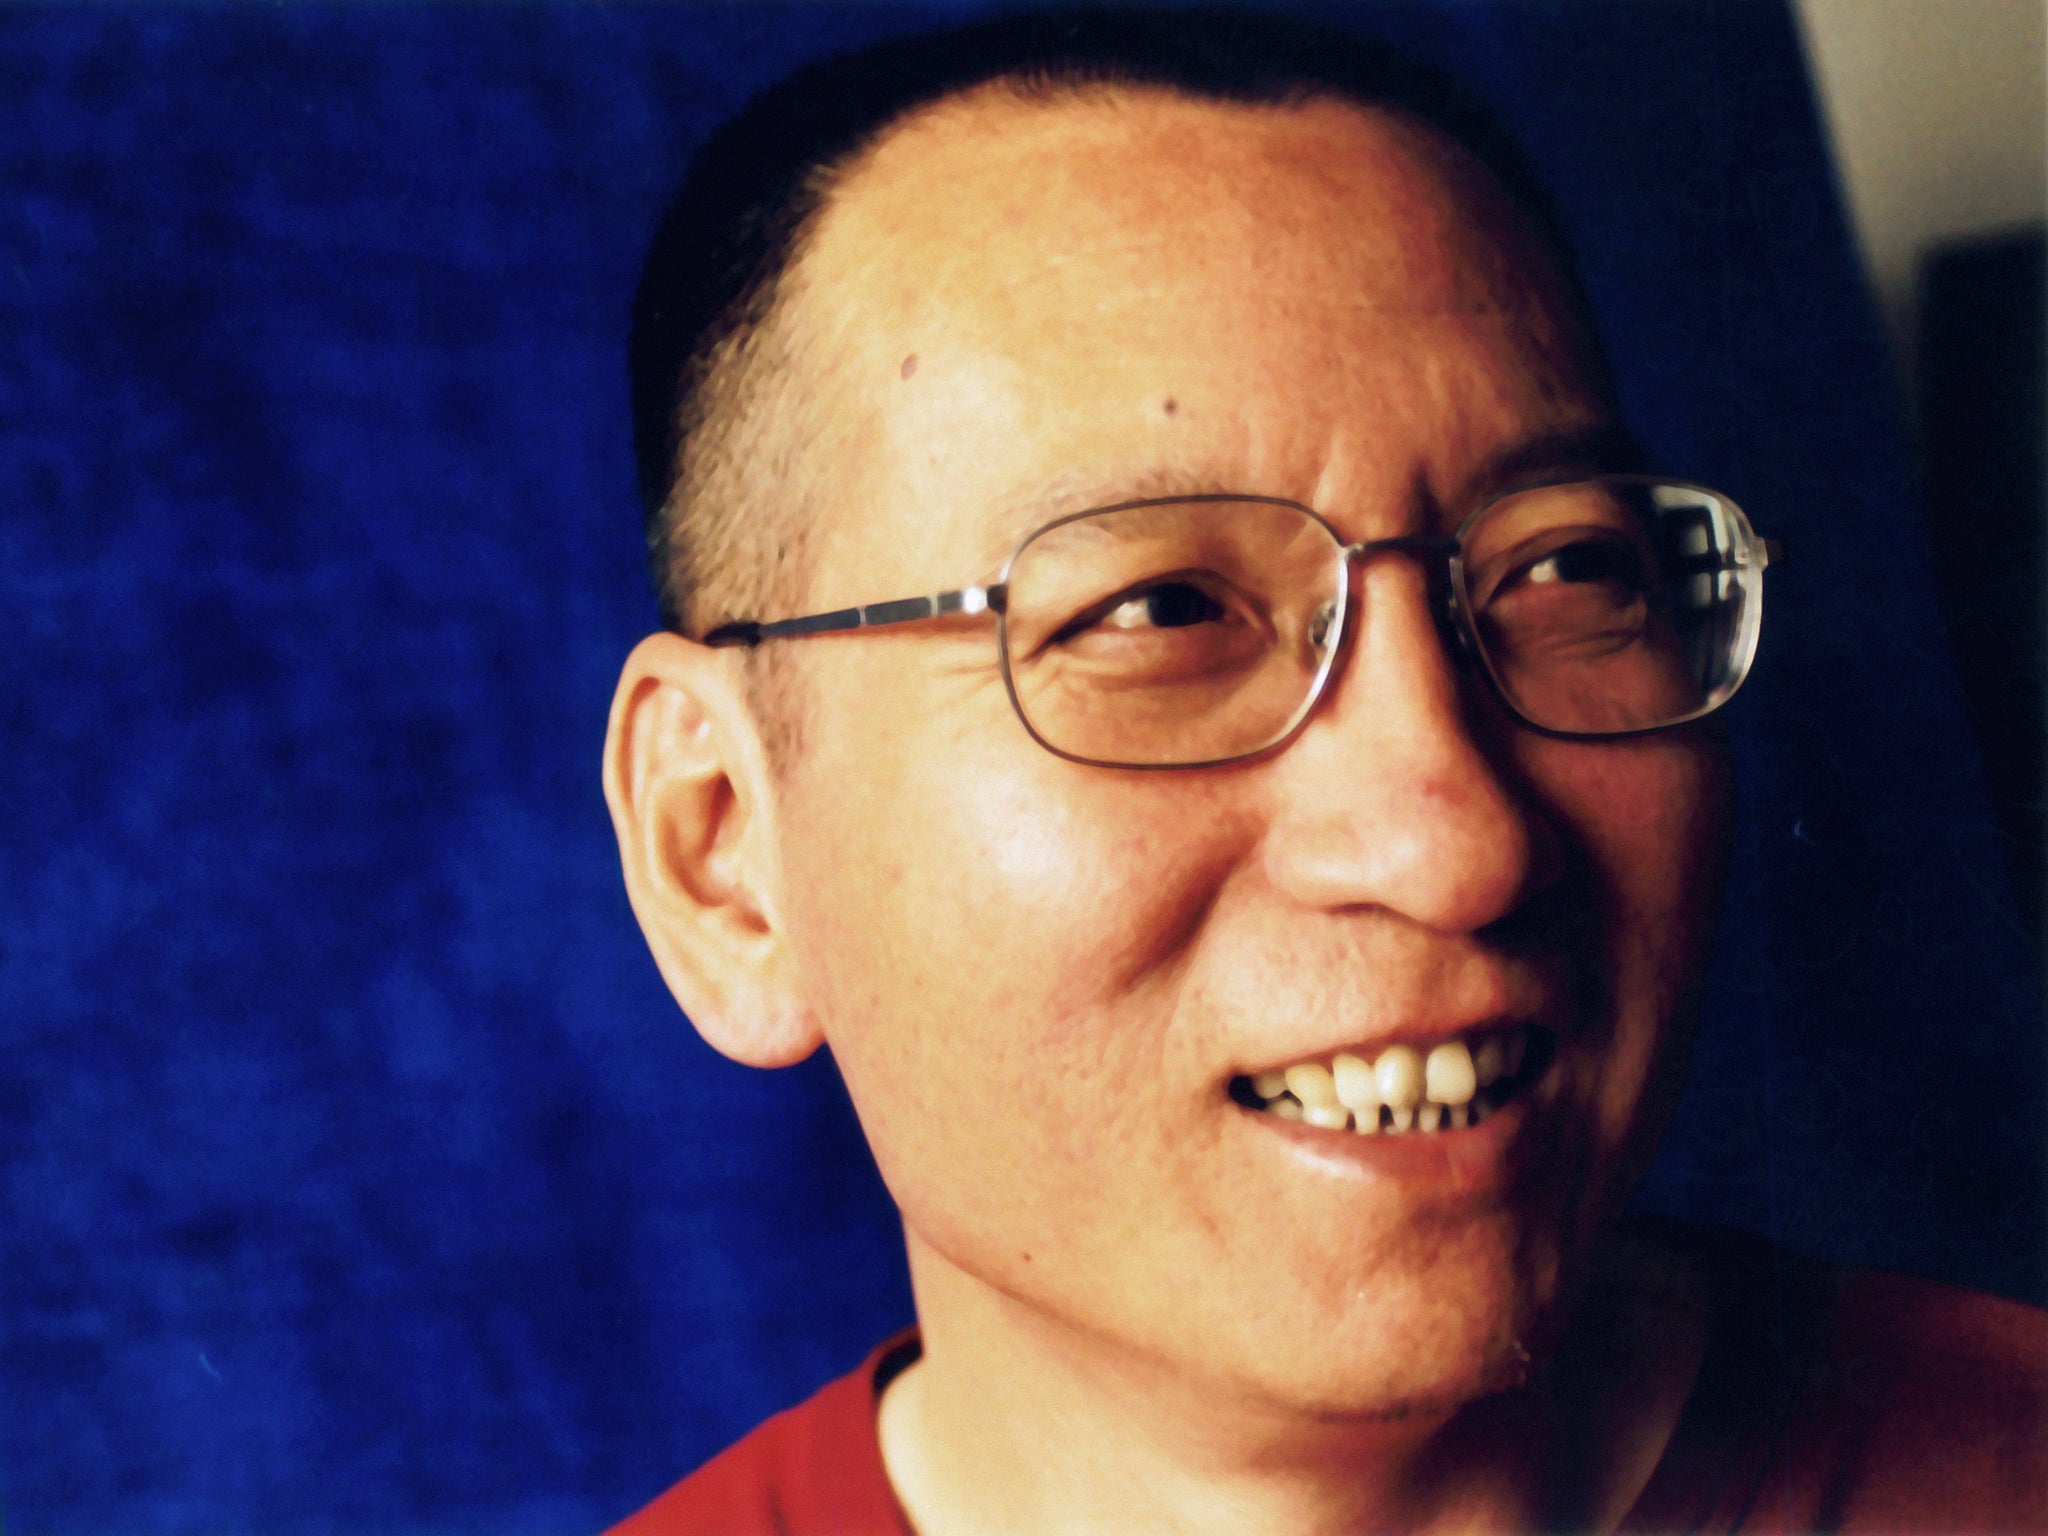 Nobel peace laureate, dissident and civil rights activist Liu Xiaobo